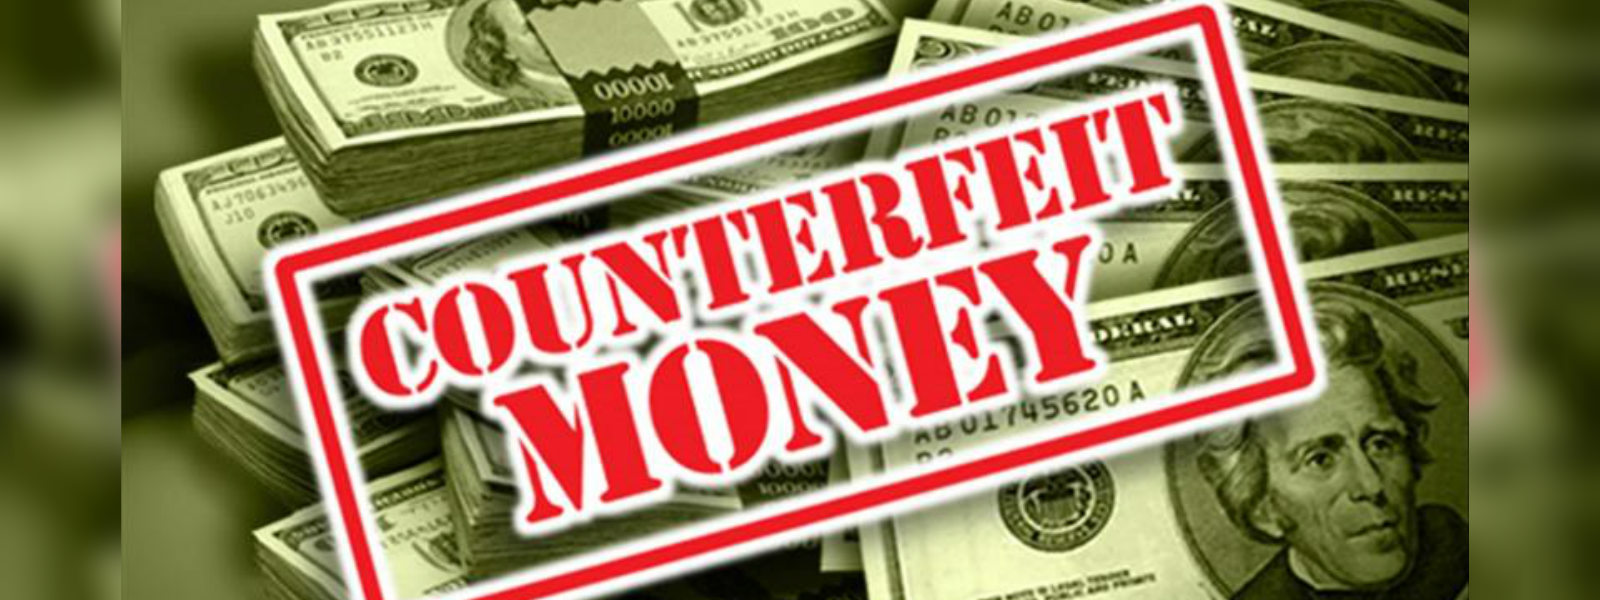 Man arrested for printing counterfeit notes